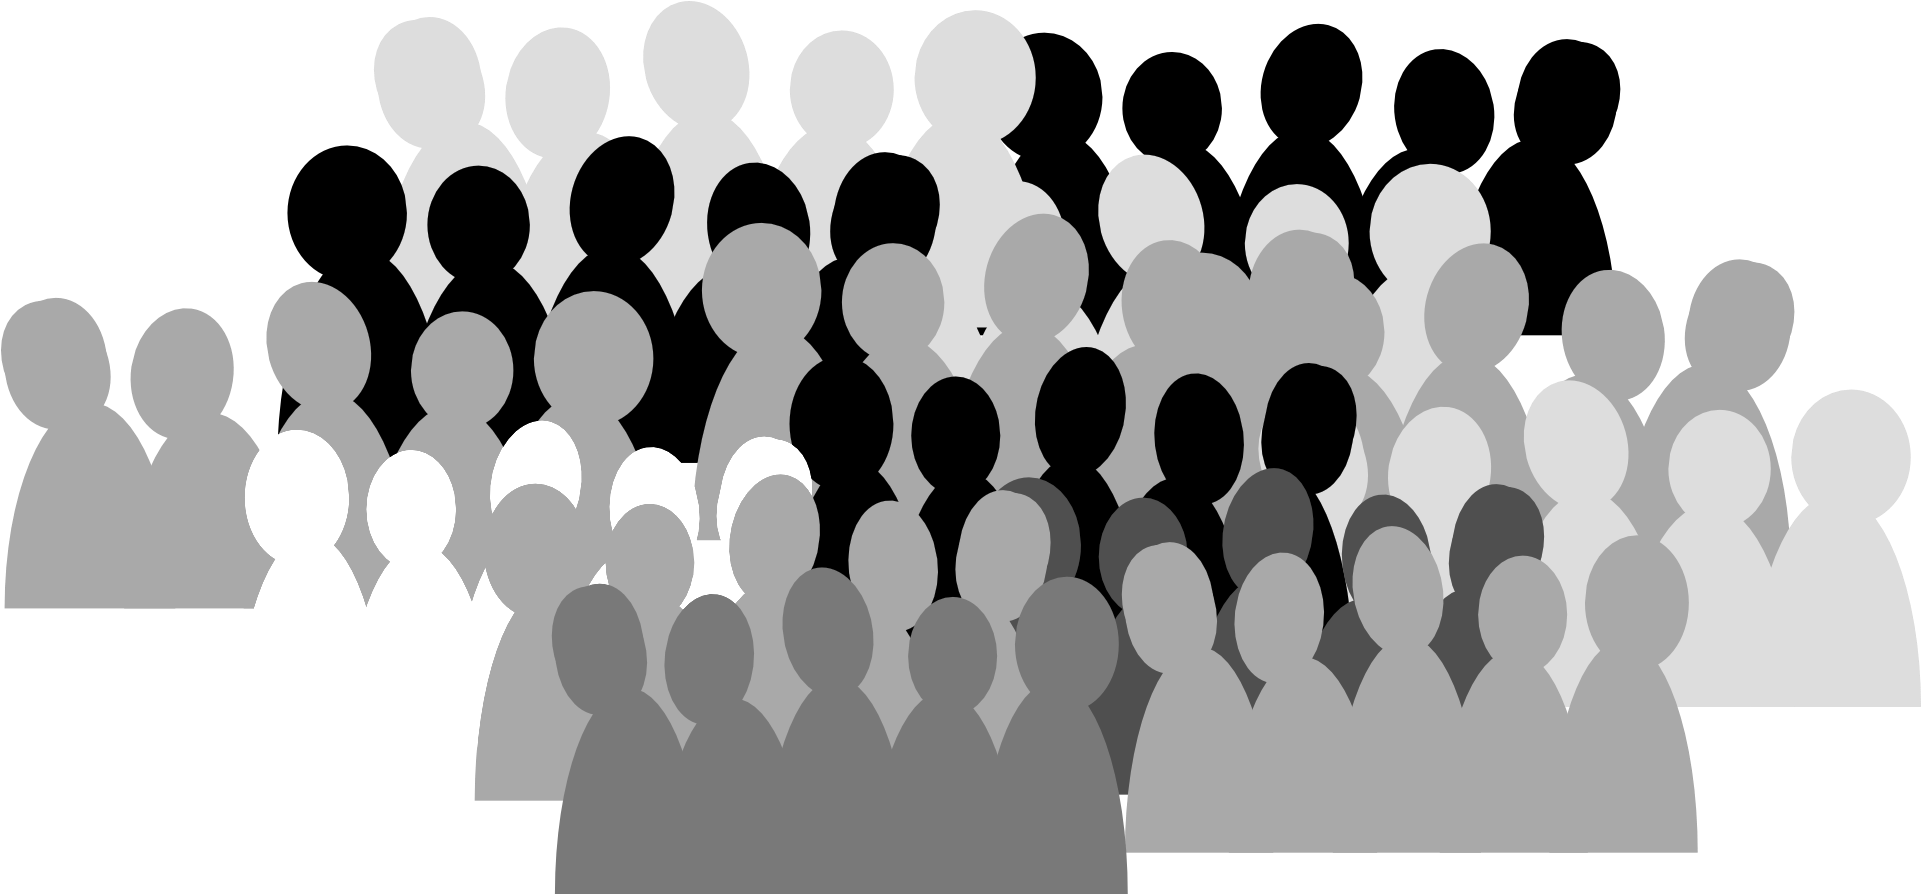 Crowd Silhouette - audience silhouette png download - 960*400 - Free